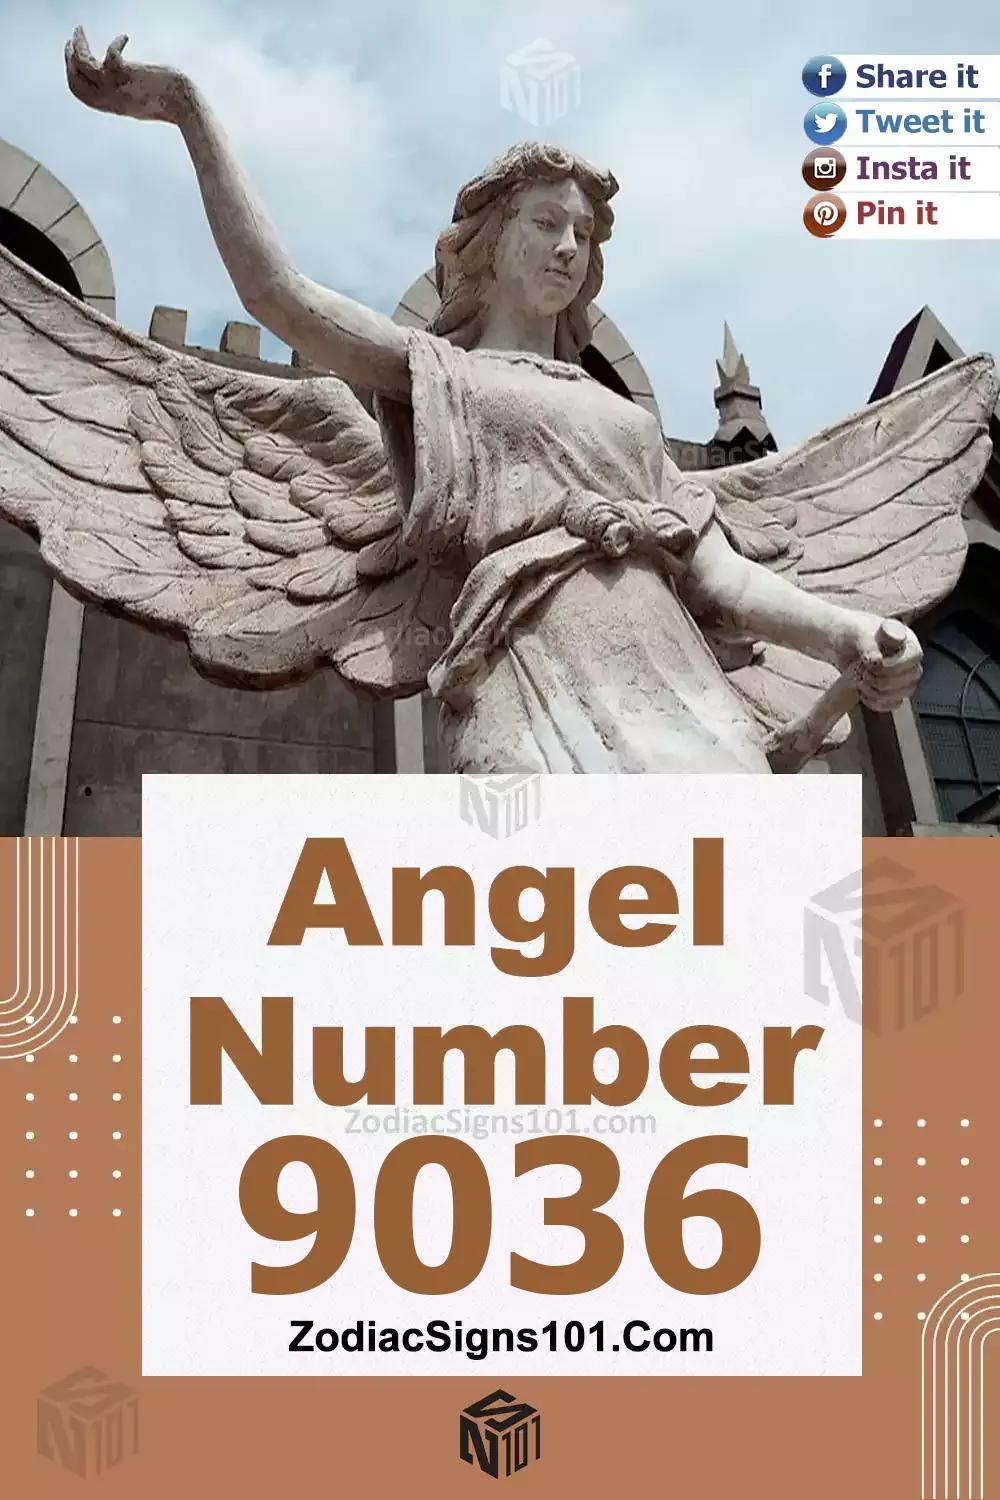 9036 Angel Number Meaning